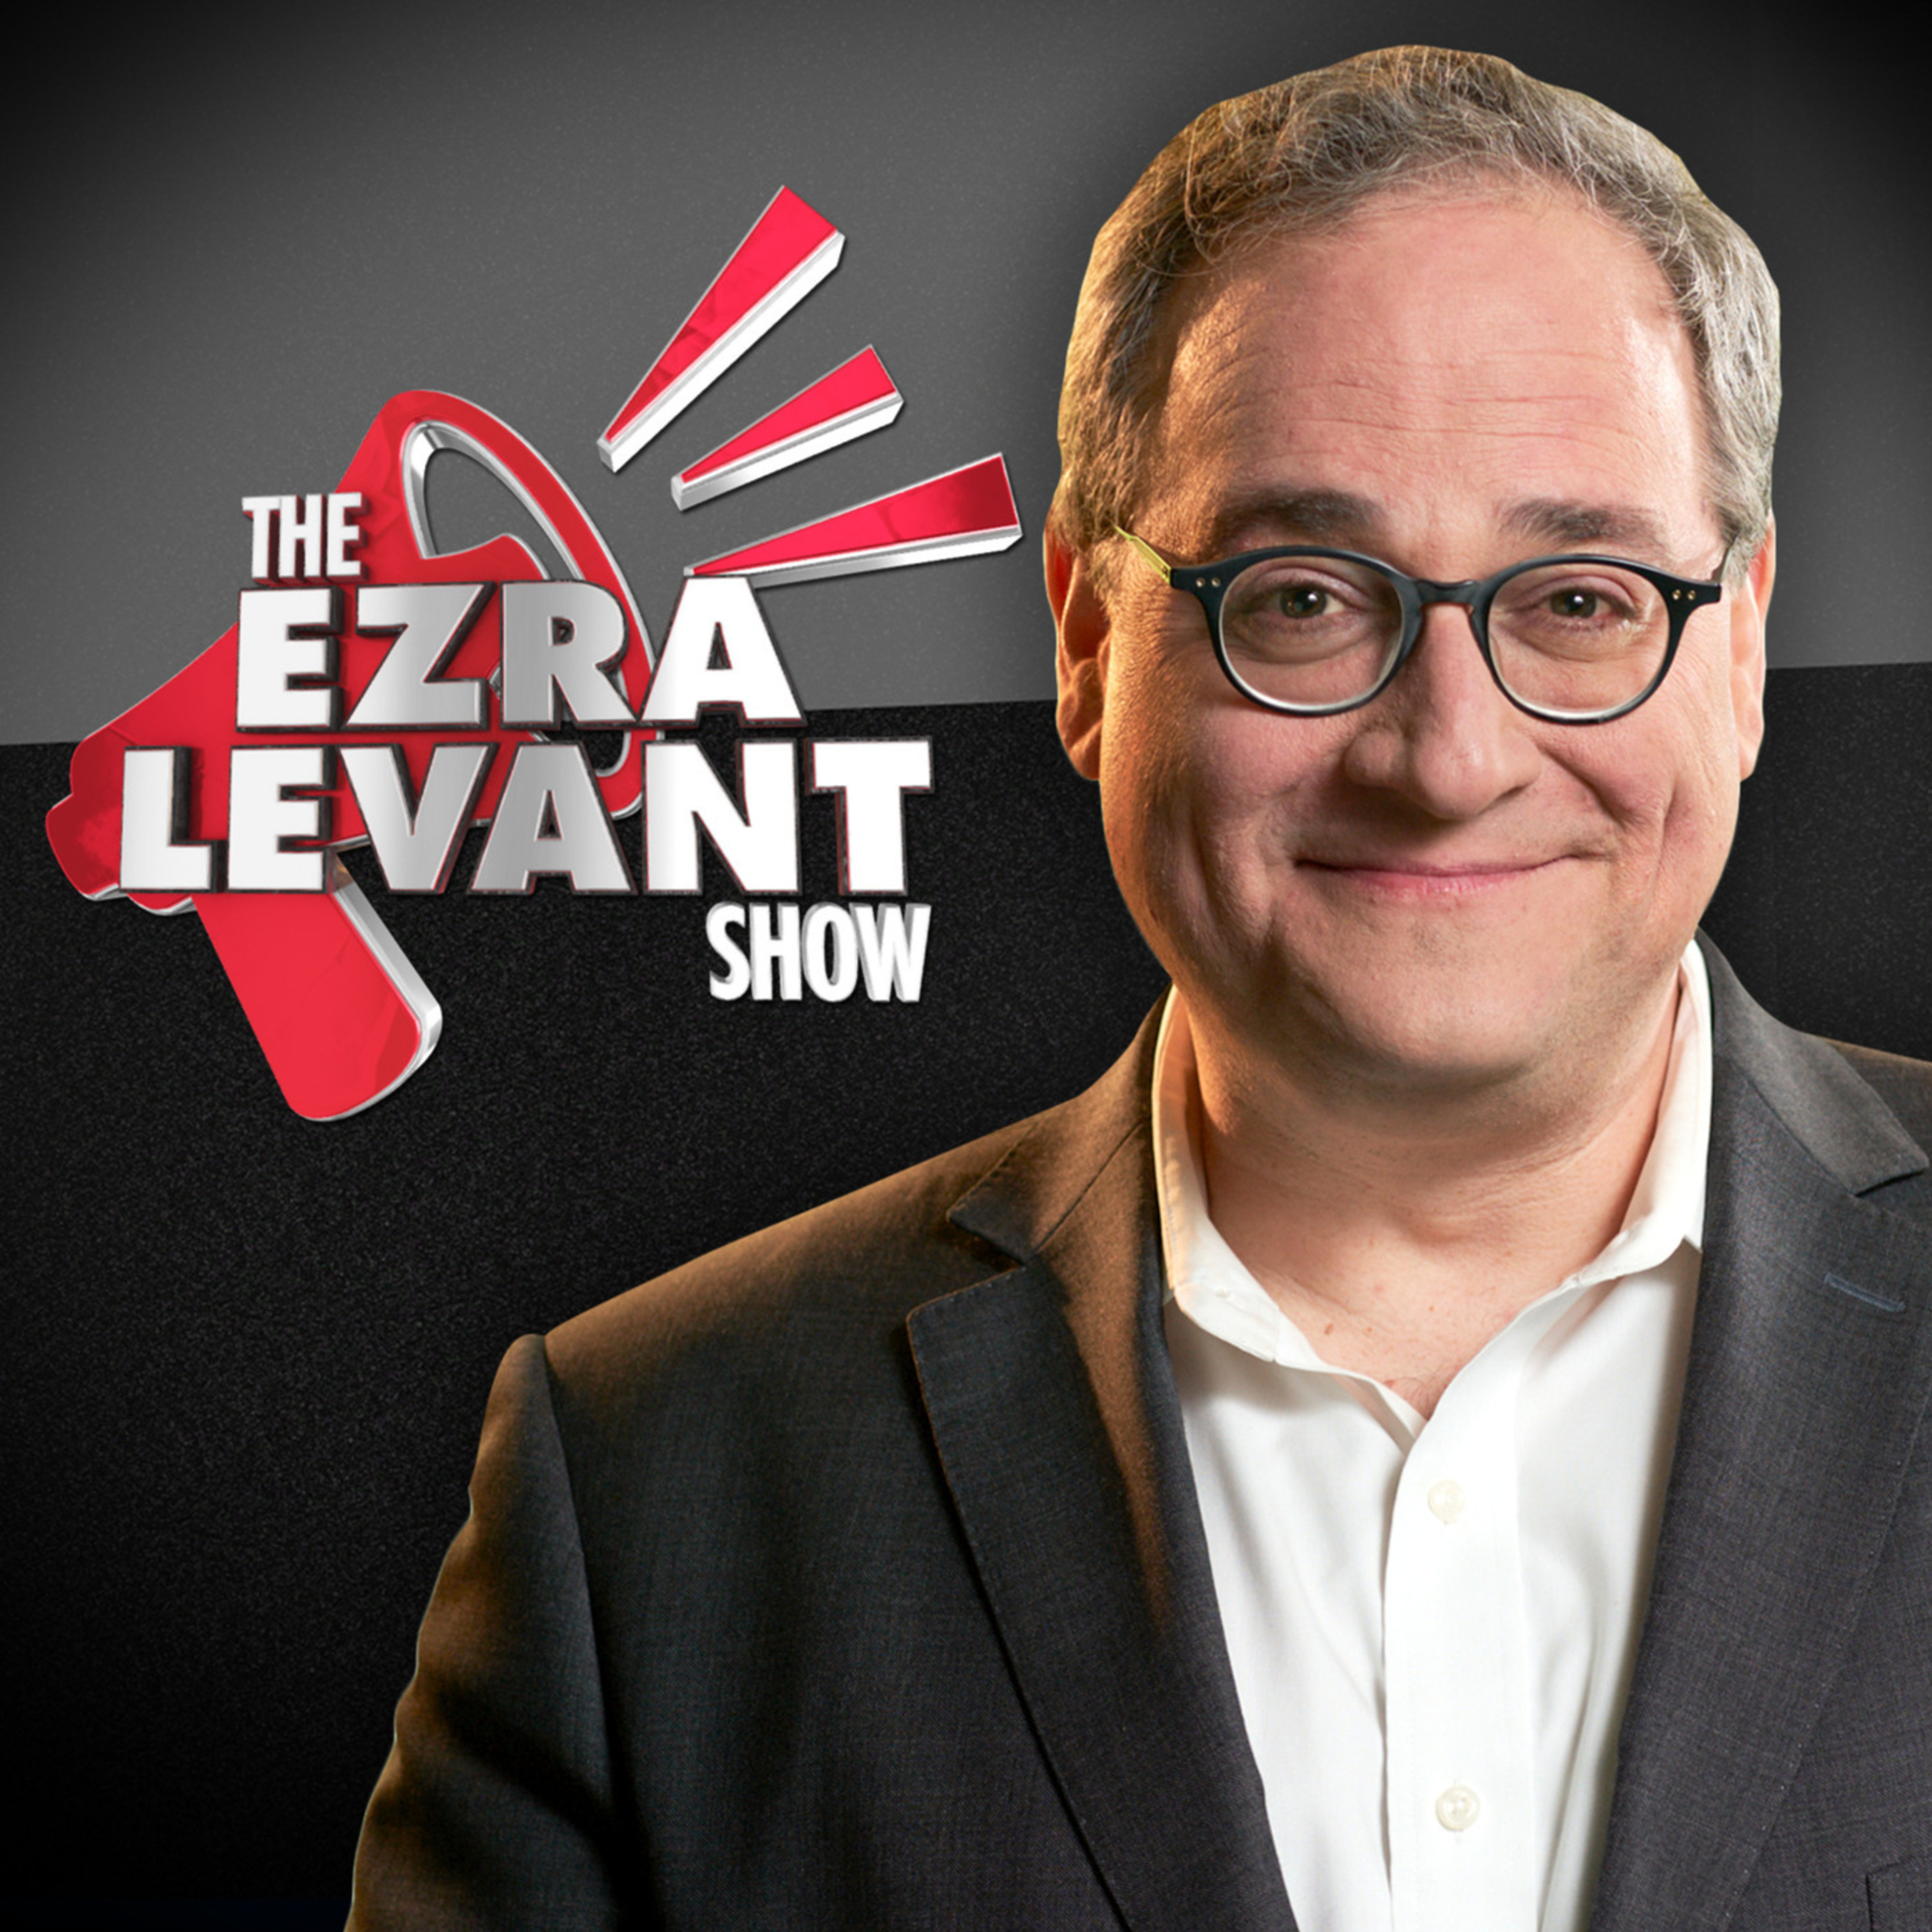 EZRA LEVANT | The Hamas hate rallies continue across the US and Canada. How long until a Jew gets shot?